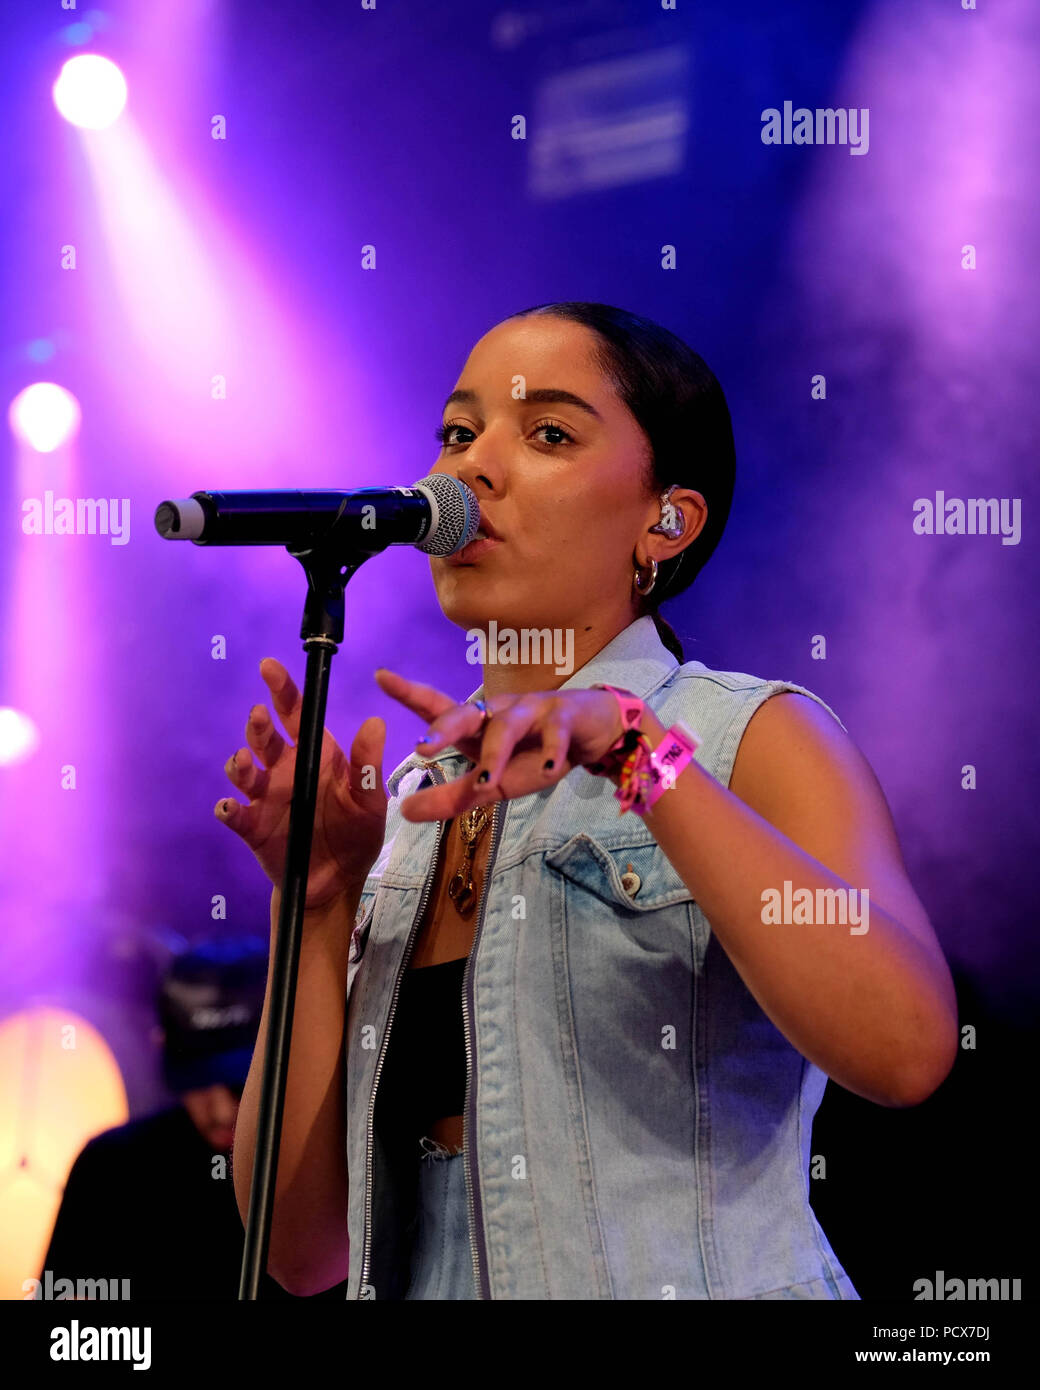 Dorset, UK. 4th August 2018. Bestival Festival Day 2 -  August 4th 2018.  Grace Carter performing on stage, Lulworth, Dorset, UK Credit: Dawn Fletcher-Park/Alamy Live News Stock Photo